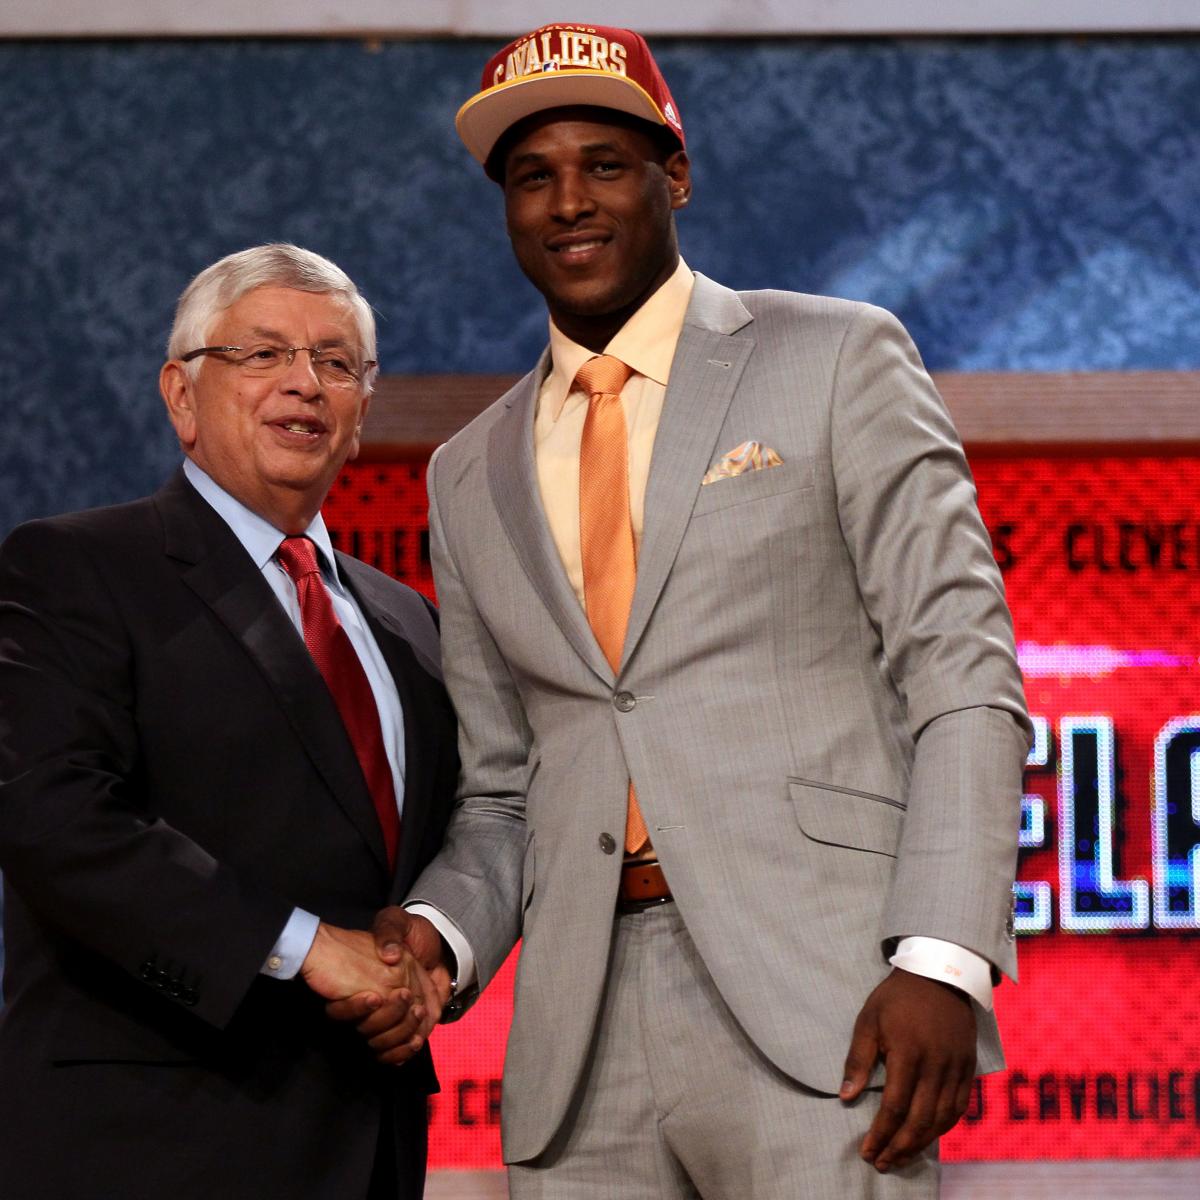 2012 No. 4 pick Dion Waiters attempting NBA comeback after 3 seasons away  from league